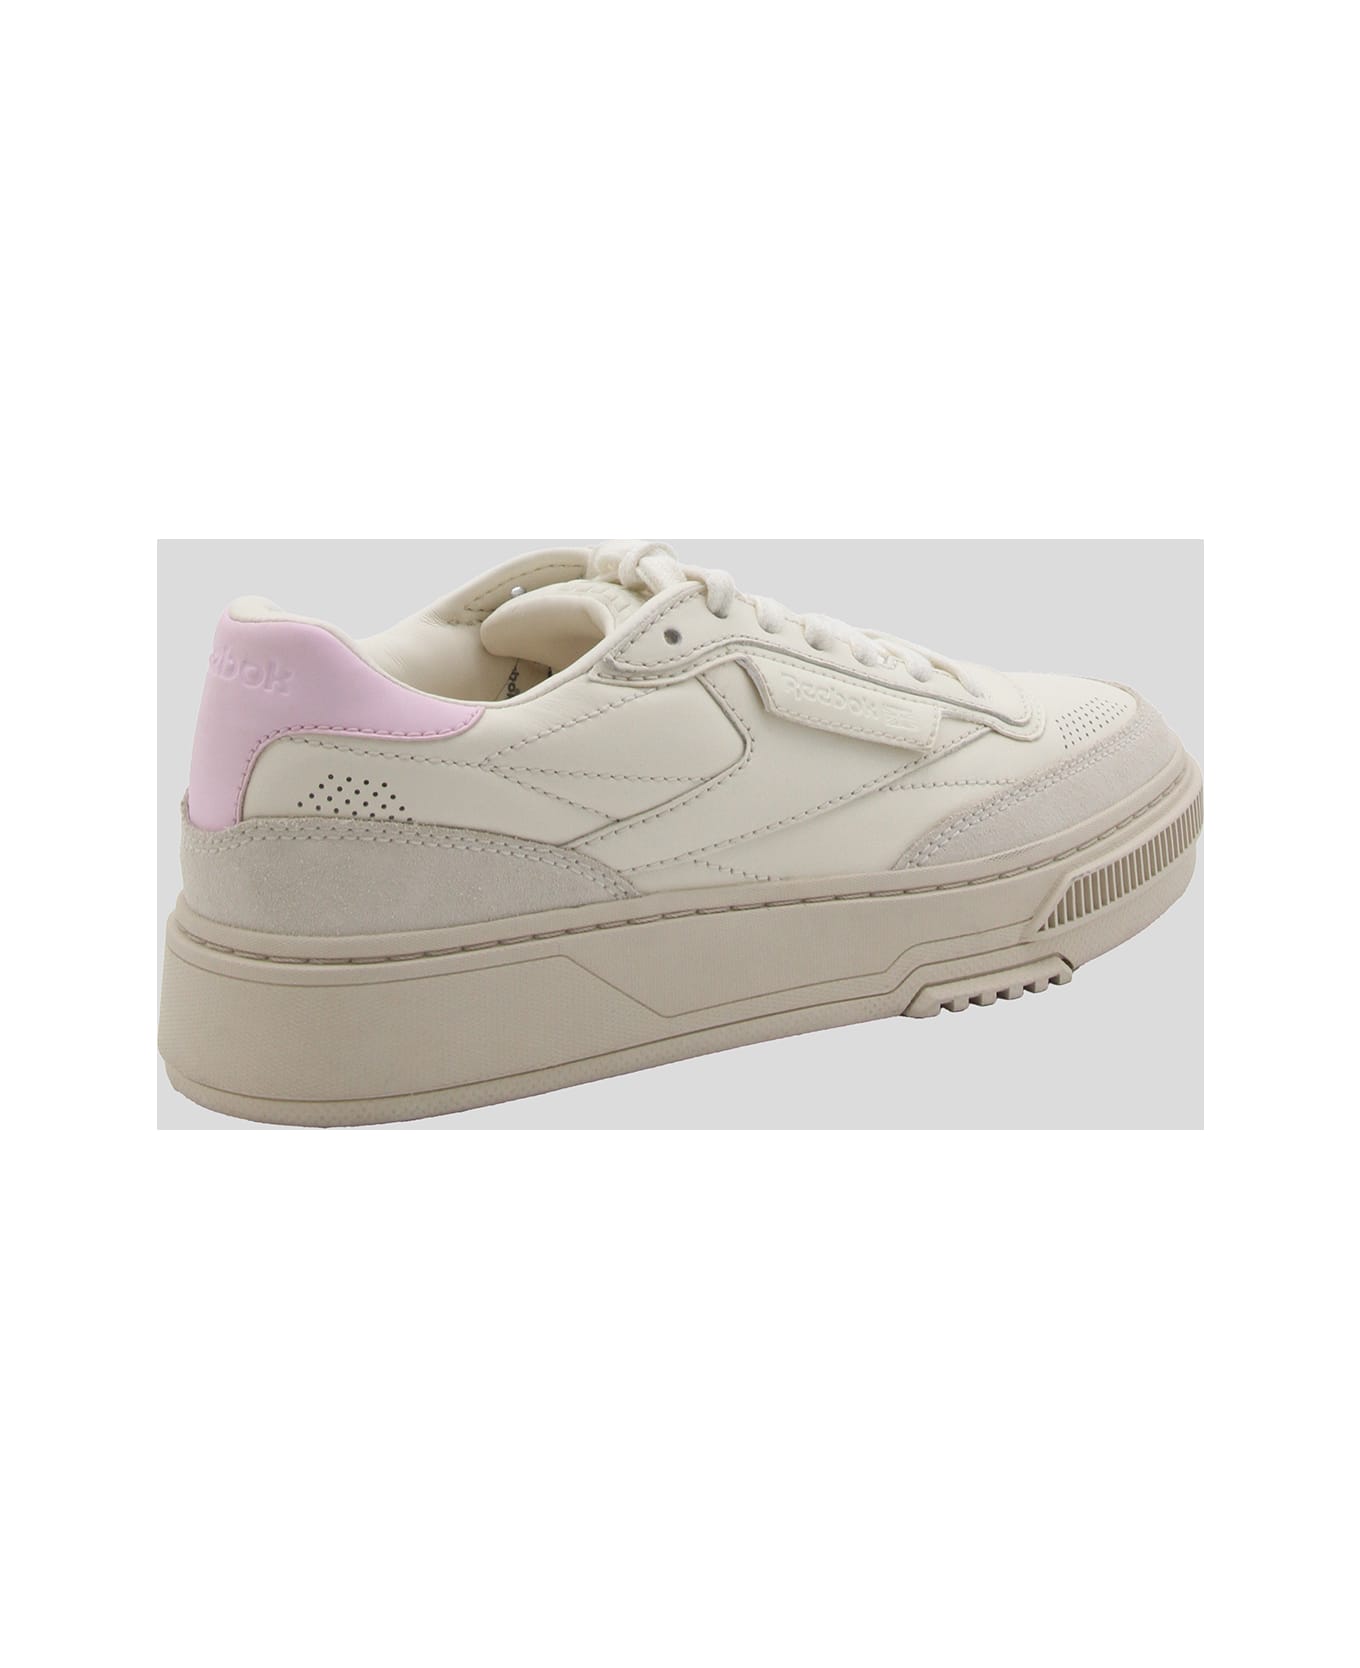 Reebok White And Pink Leather C Ltd Sneakers - White